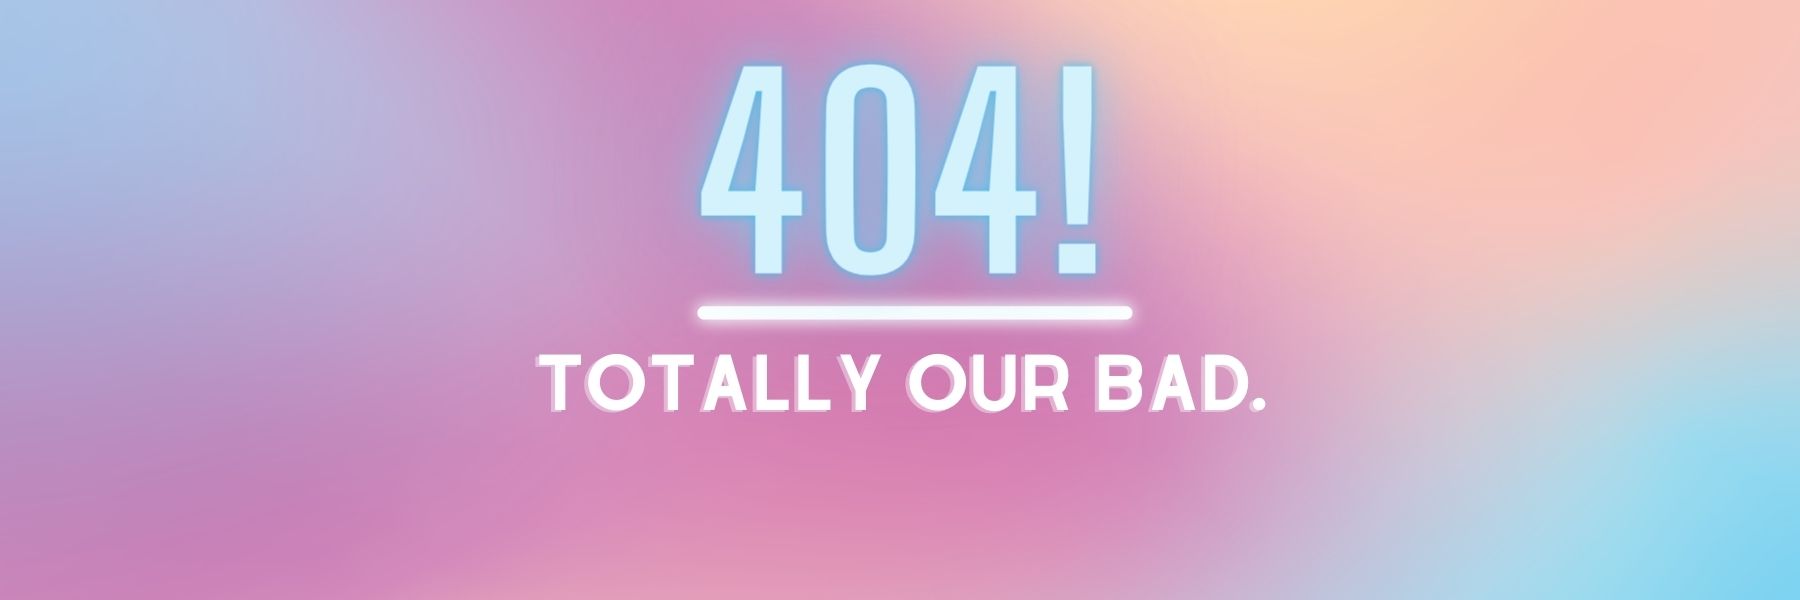 404 Page Apology Banner